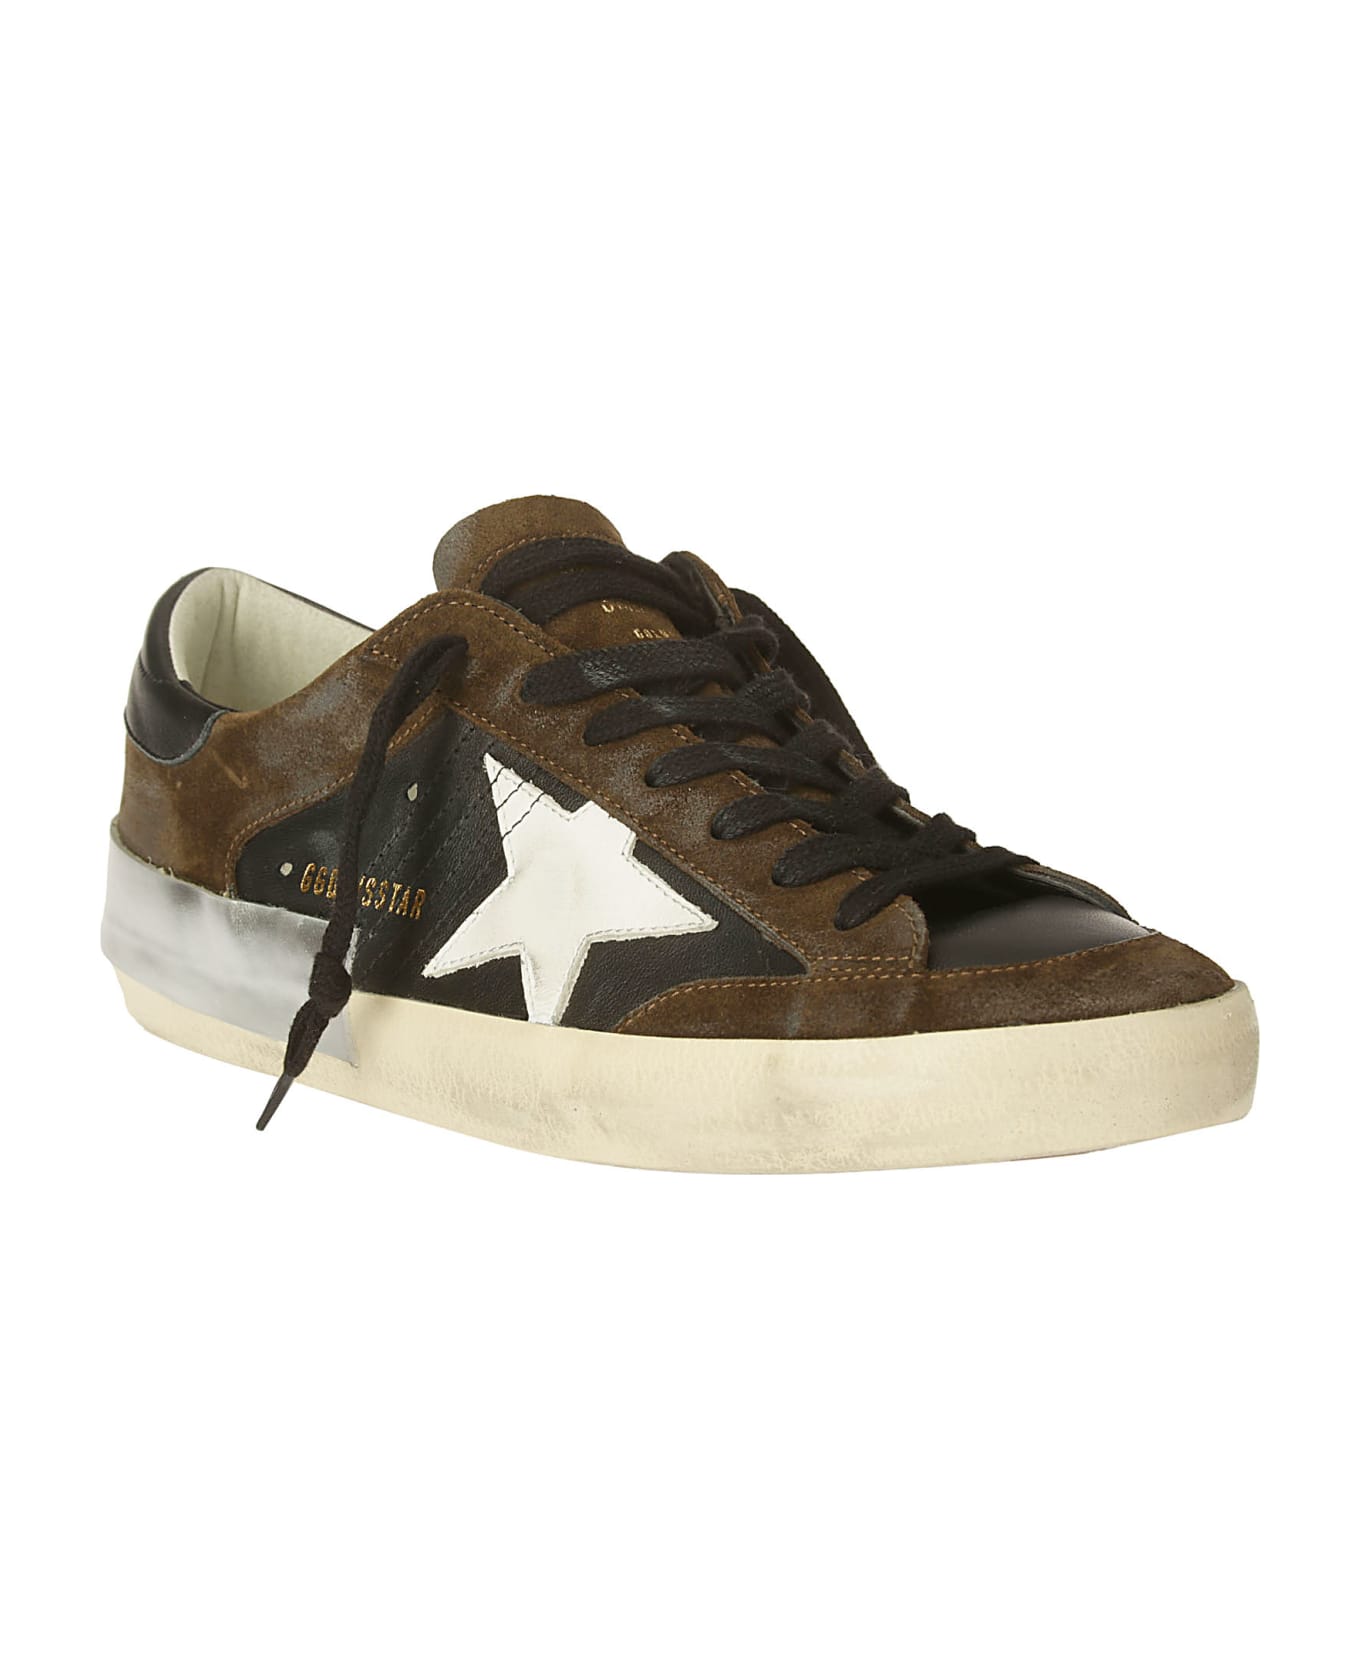 Golden Goose Super Star Lace-up Sneakers - BLACK/BROWN/WHITE